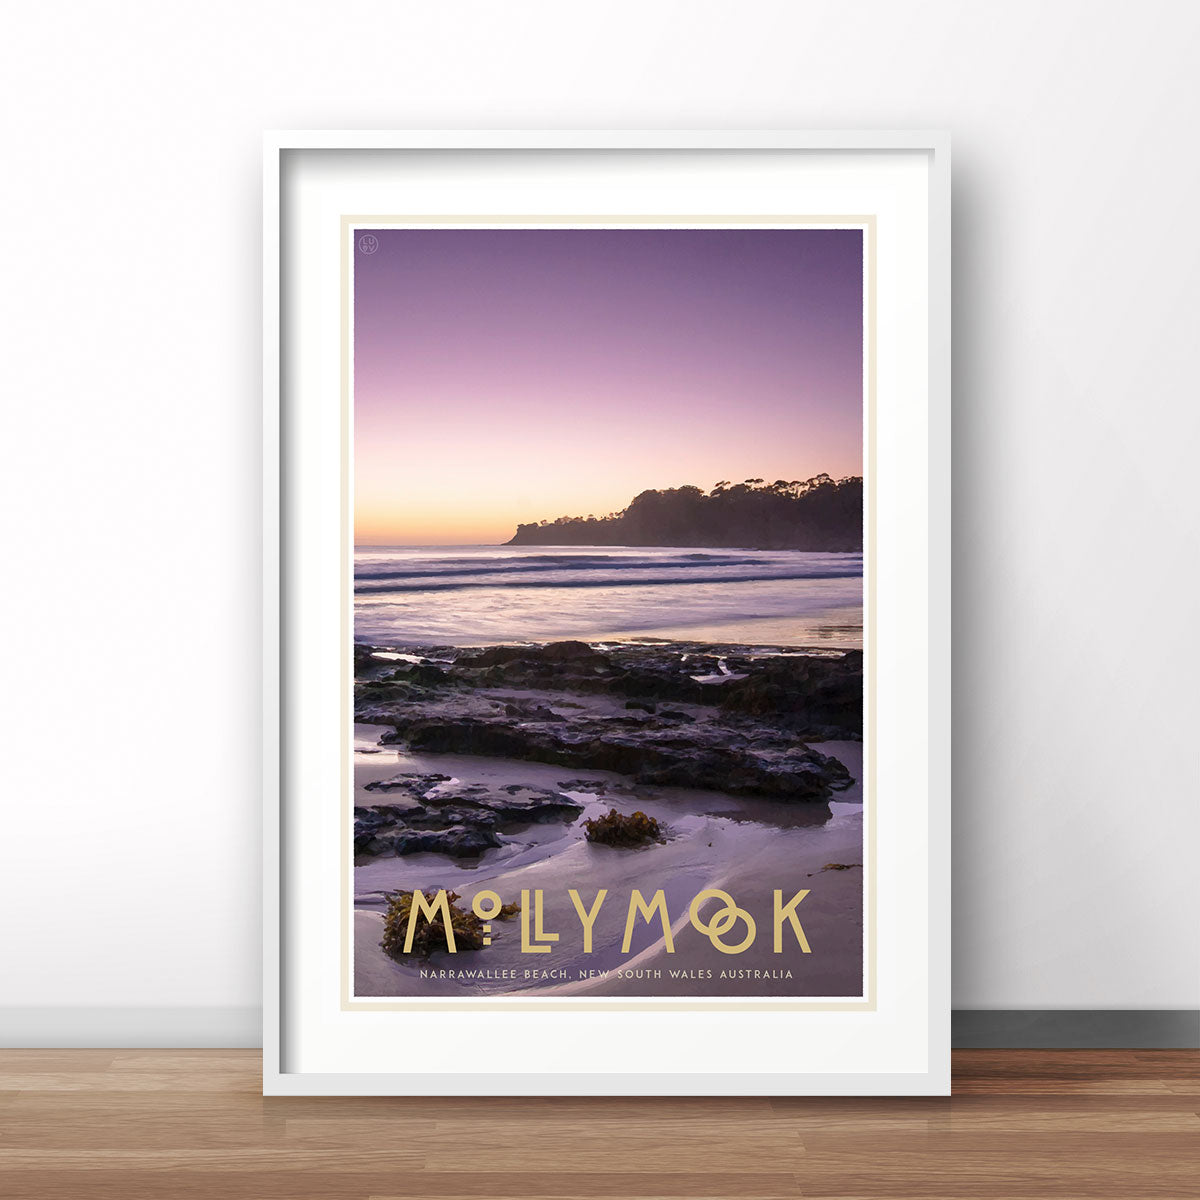 Mollymook white framed print vintage travel poster style. Original design by Places We Luv